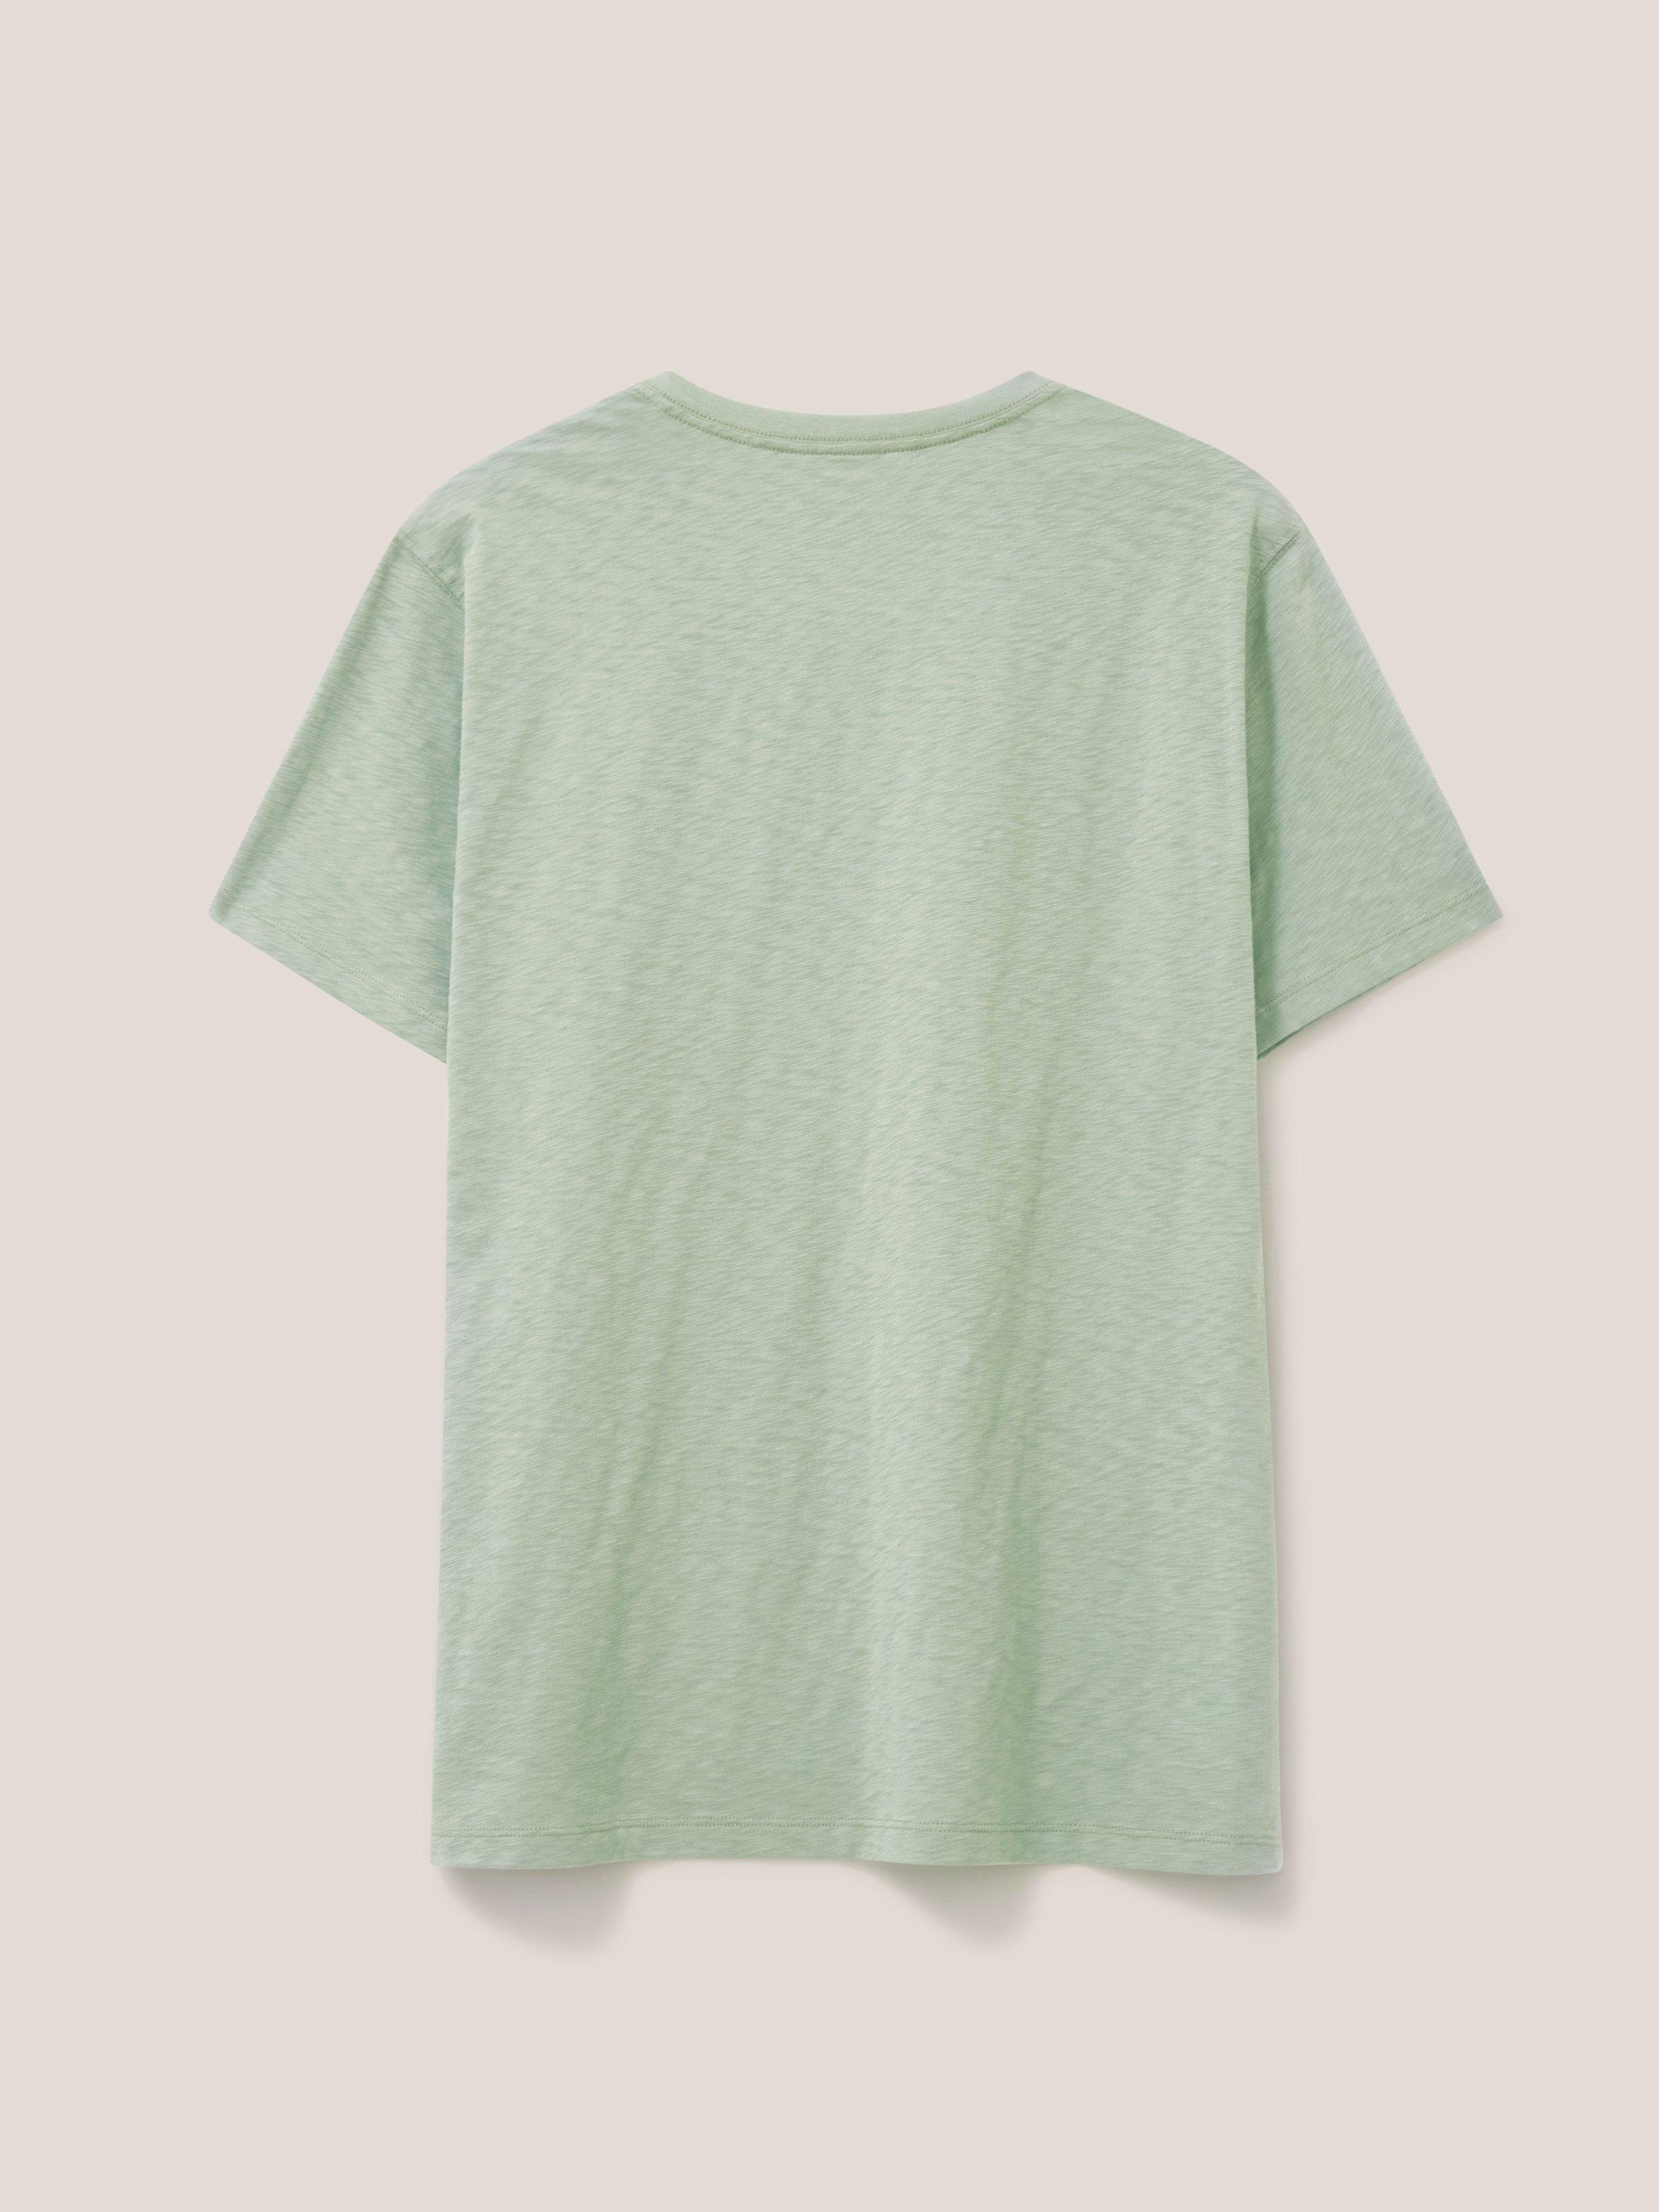 Palm Springs Graphic Tee in DUS GREEN - FLAT BACK